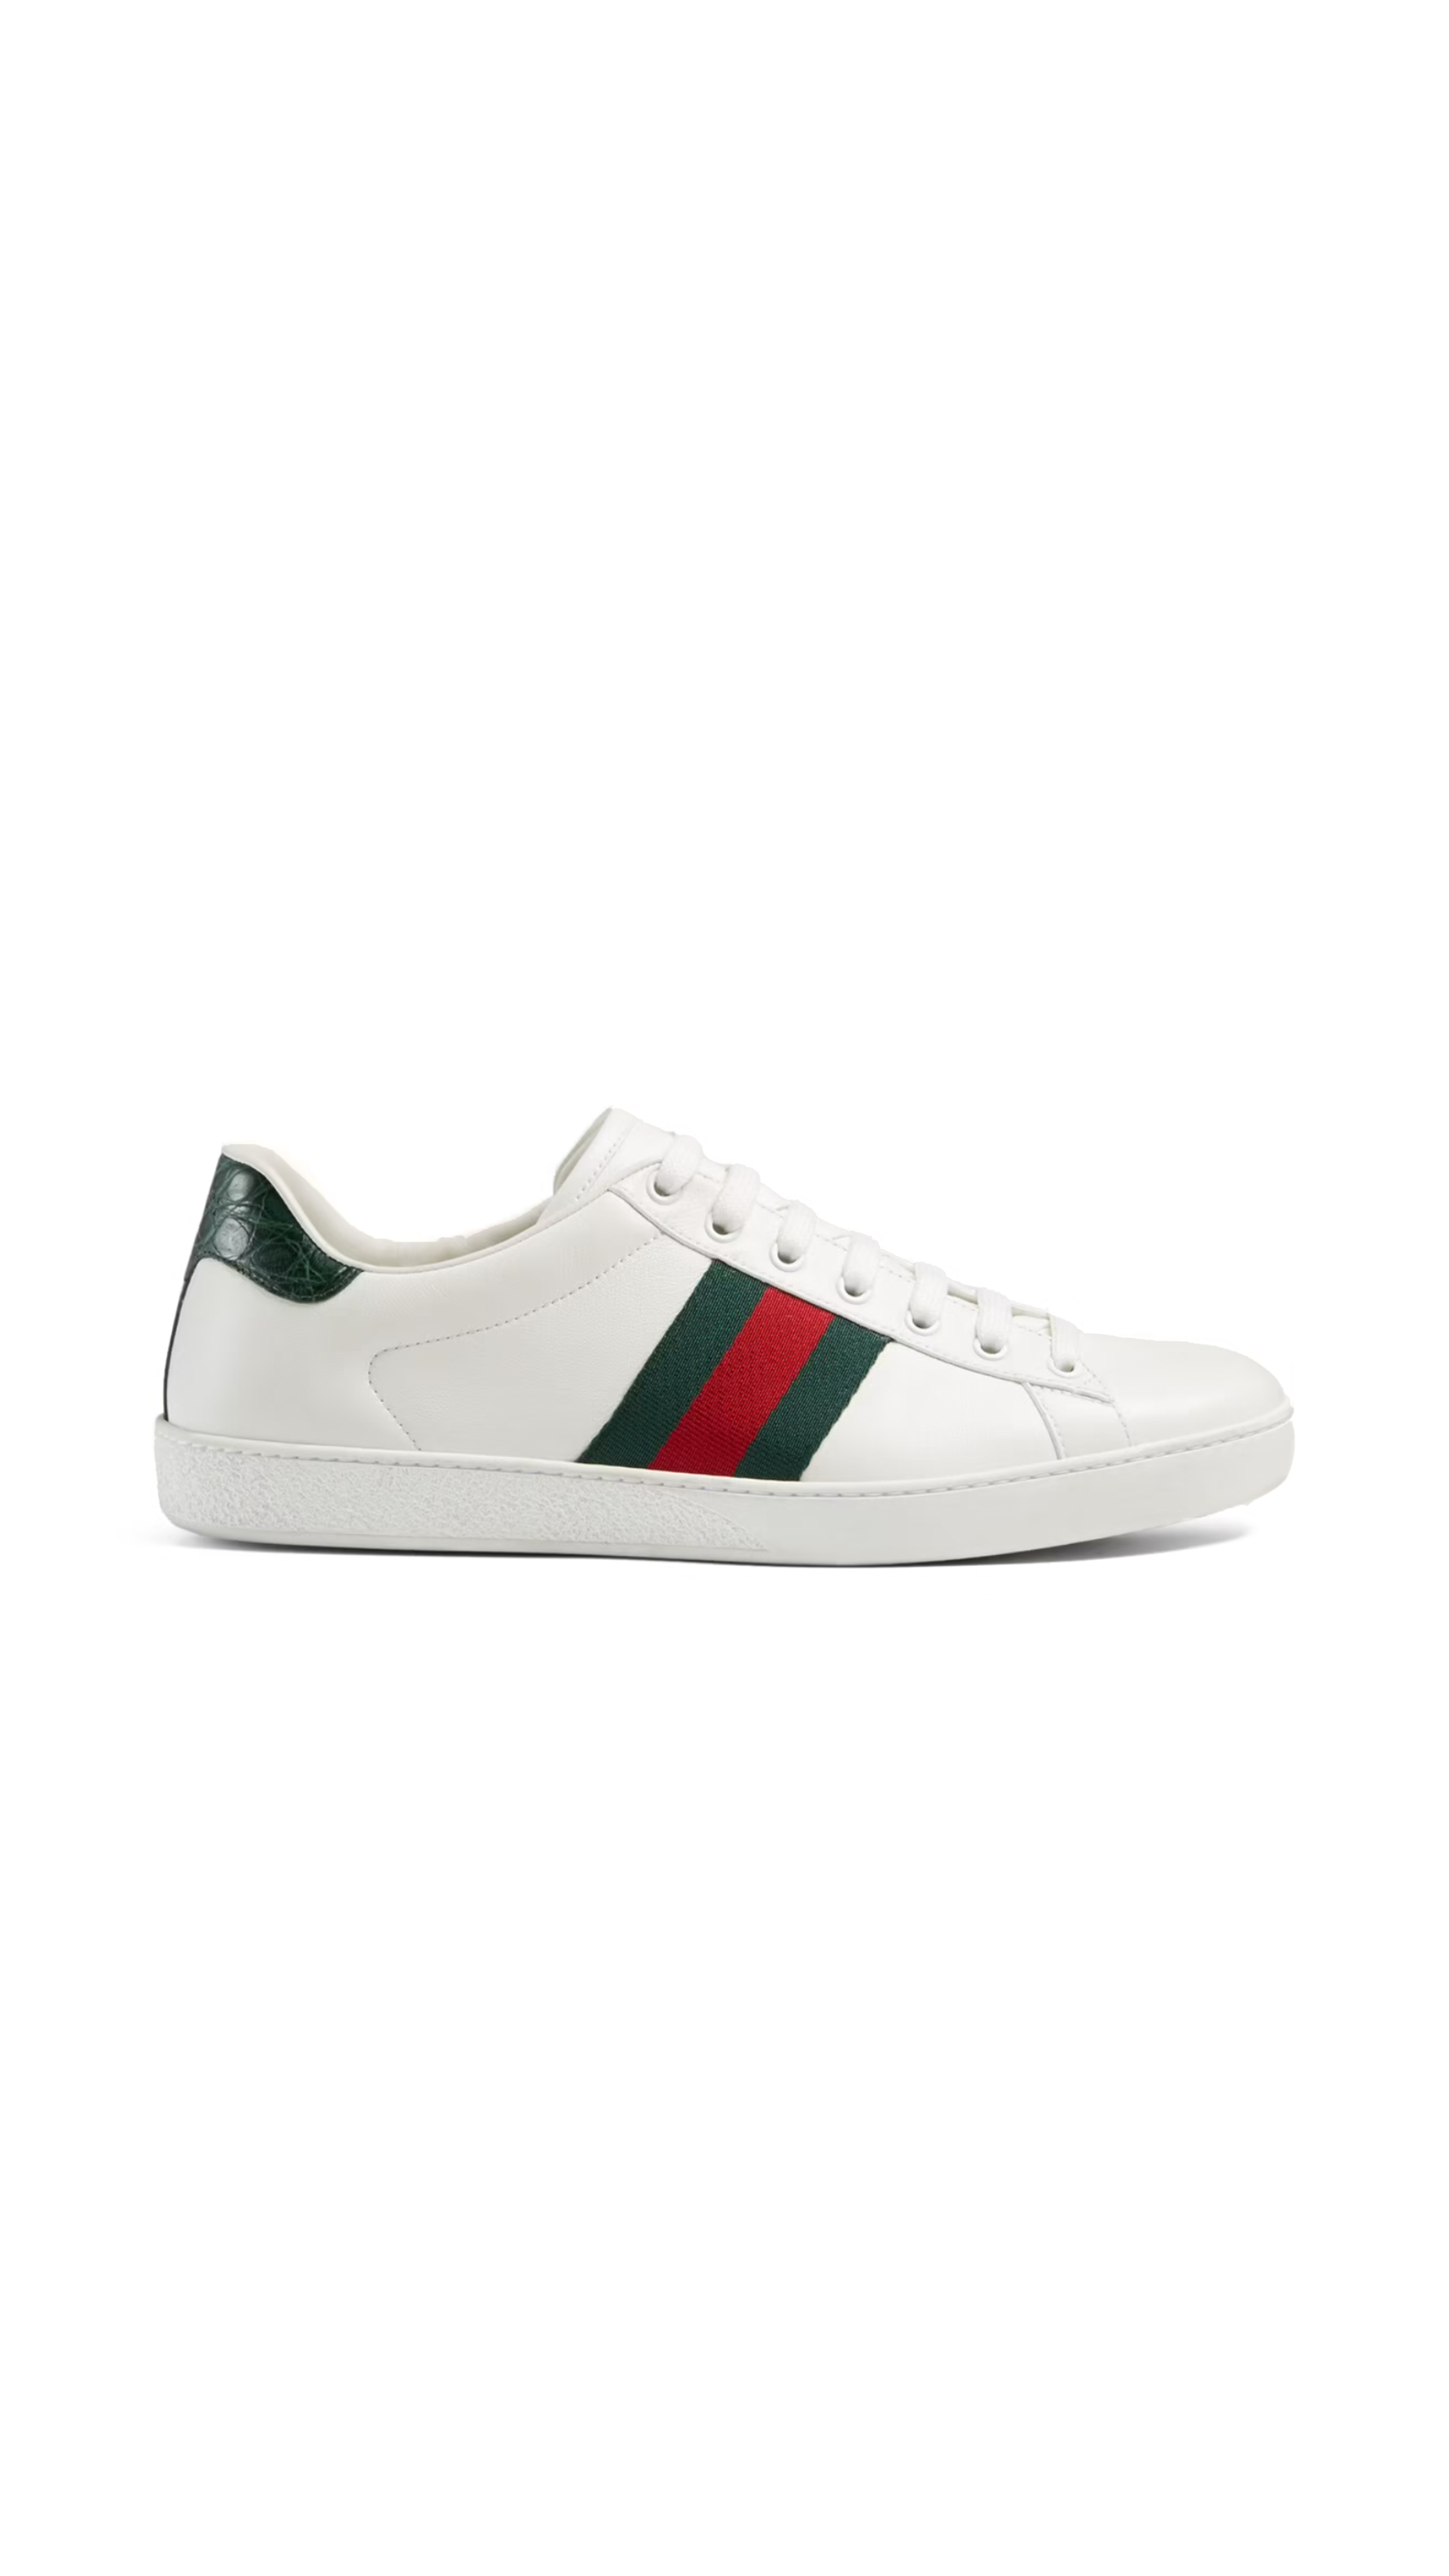 Ace Sneakers - White/Green/Red